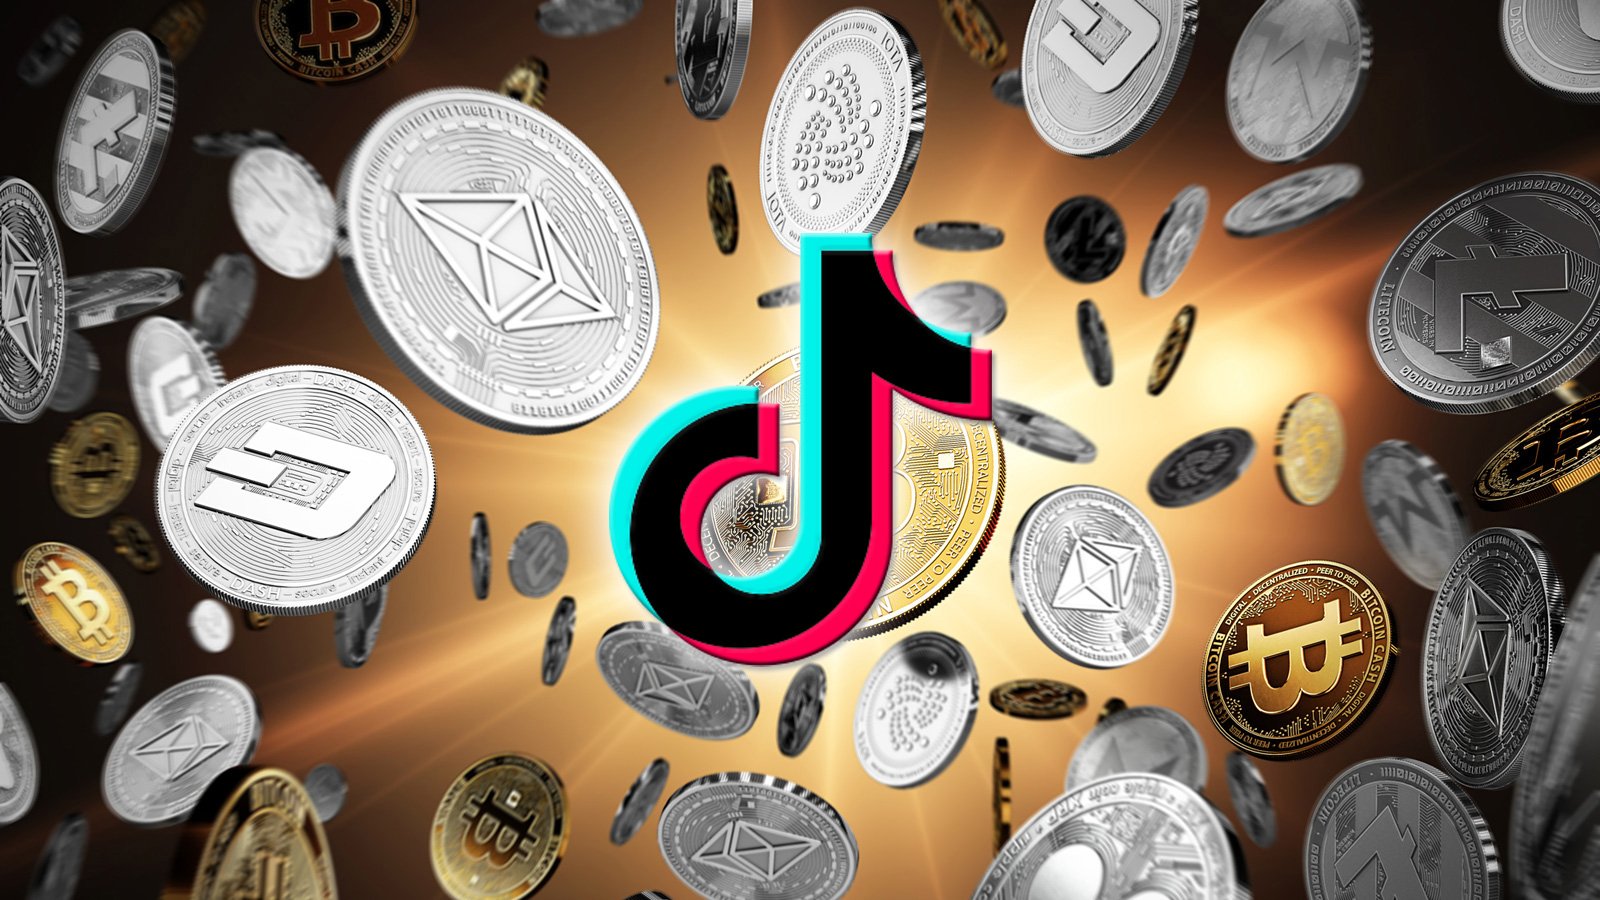 TikTok flooded by ‘Elon Musk’ cryptocurrency giveaway scams | Digital Noch